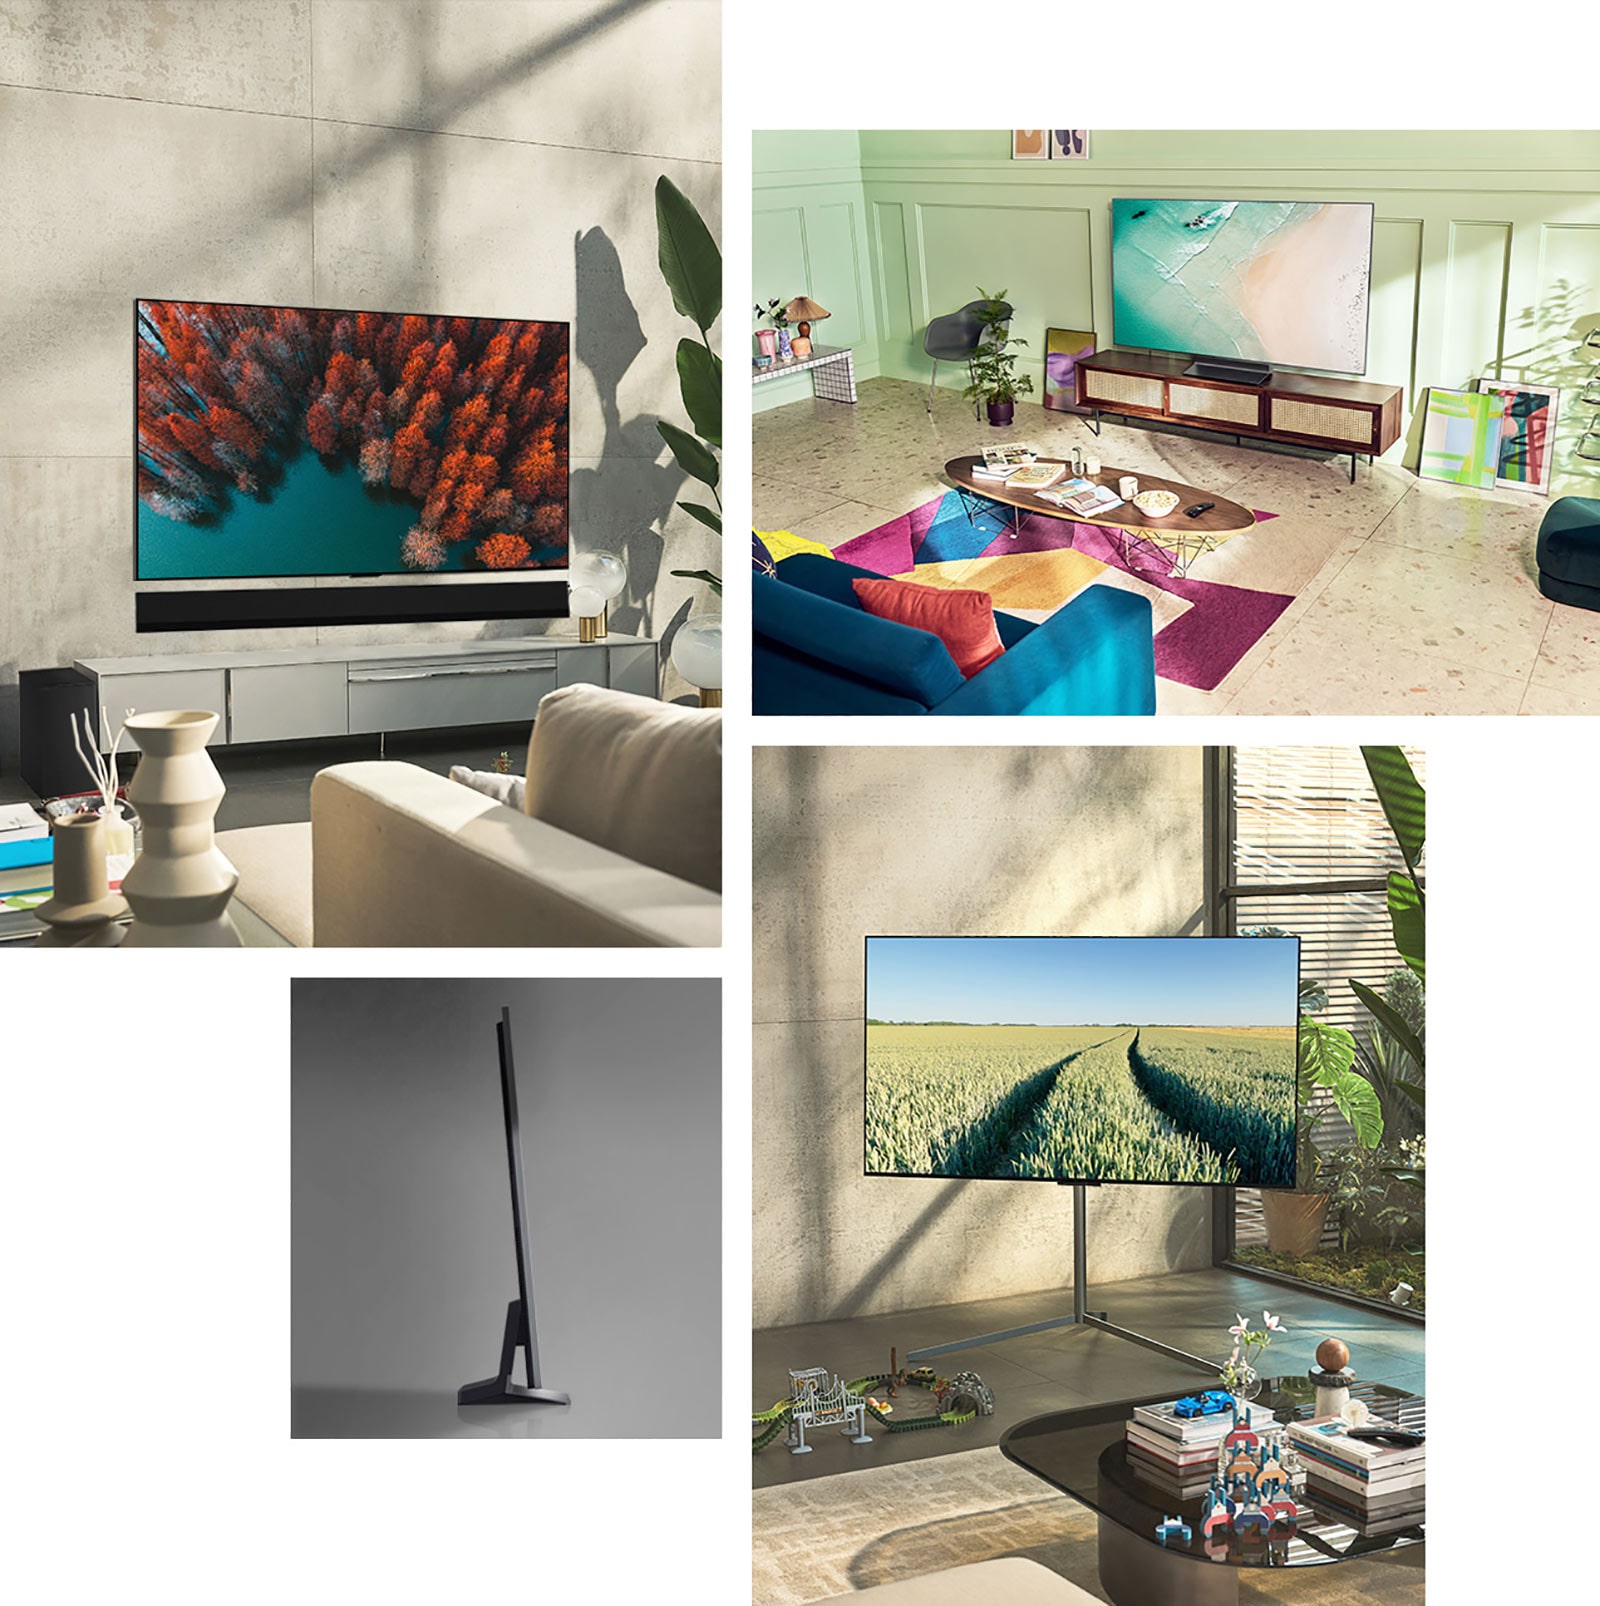 An LG OLED G2 is hung on the wall in a living room with plants, a pile of books, and a vintage-style cabinet. An LG OLED G2 is hung on the wall in a minimalist-looking room beside a shelf with monochrome ornaments. A side view of the ultra-slim edge of LG OLED G2. An LG OLED G2 is hung on a colorful living room wall with a dried planet, diffuser, and vases. A close-up of an edge on the ultra-slim LG OLED G2.